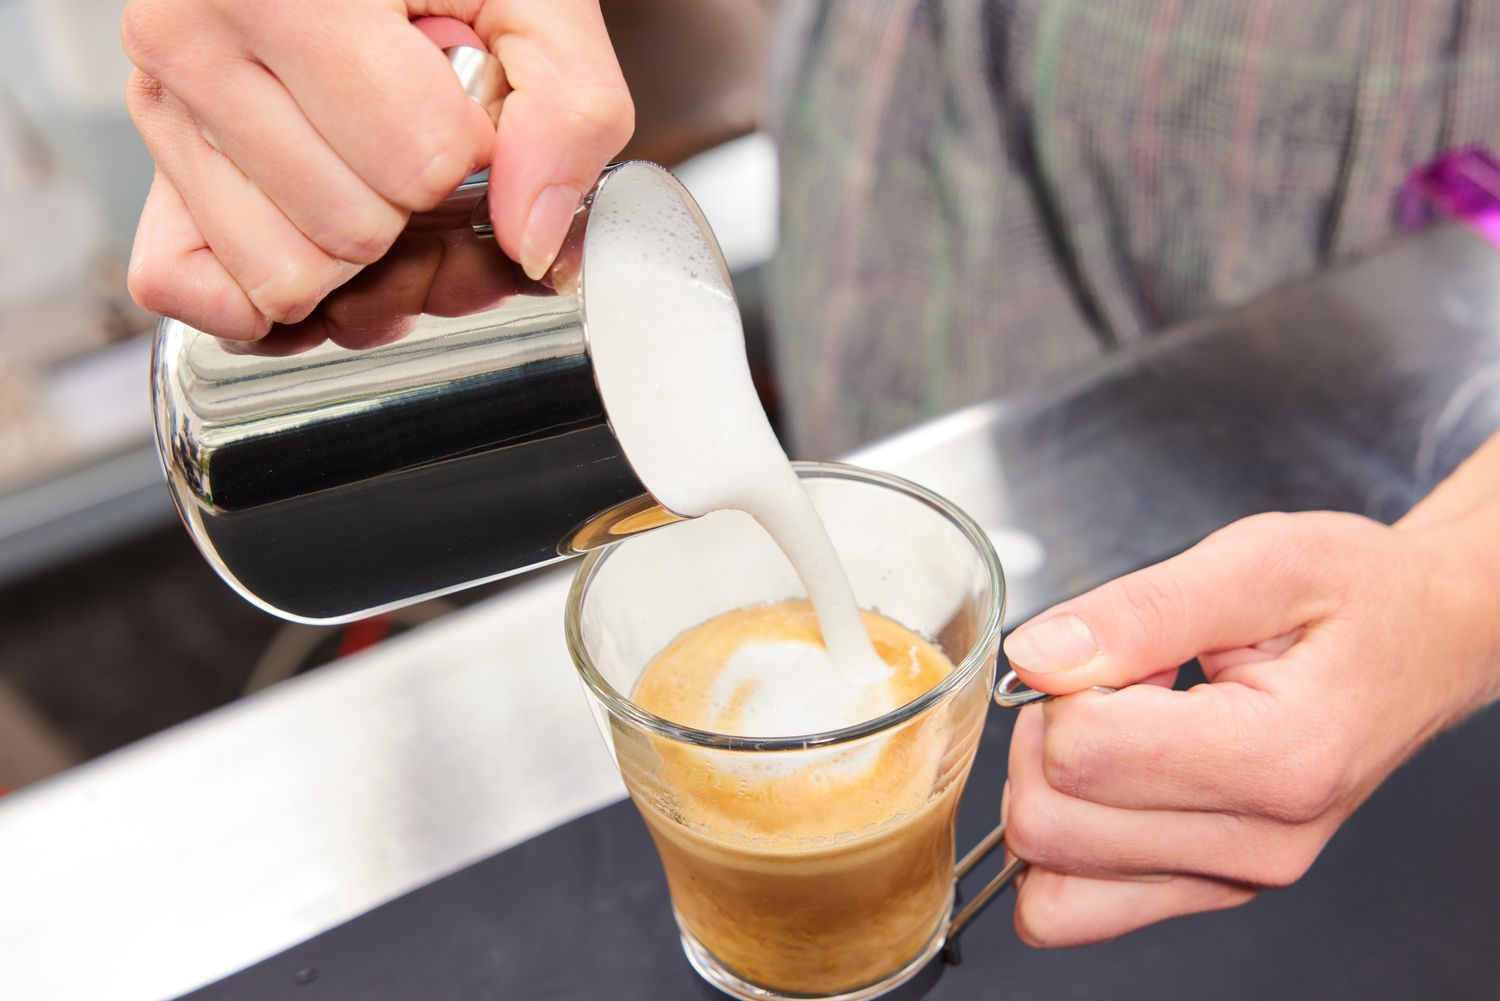 A person pours frothed milk into a cup of espresso.